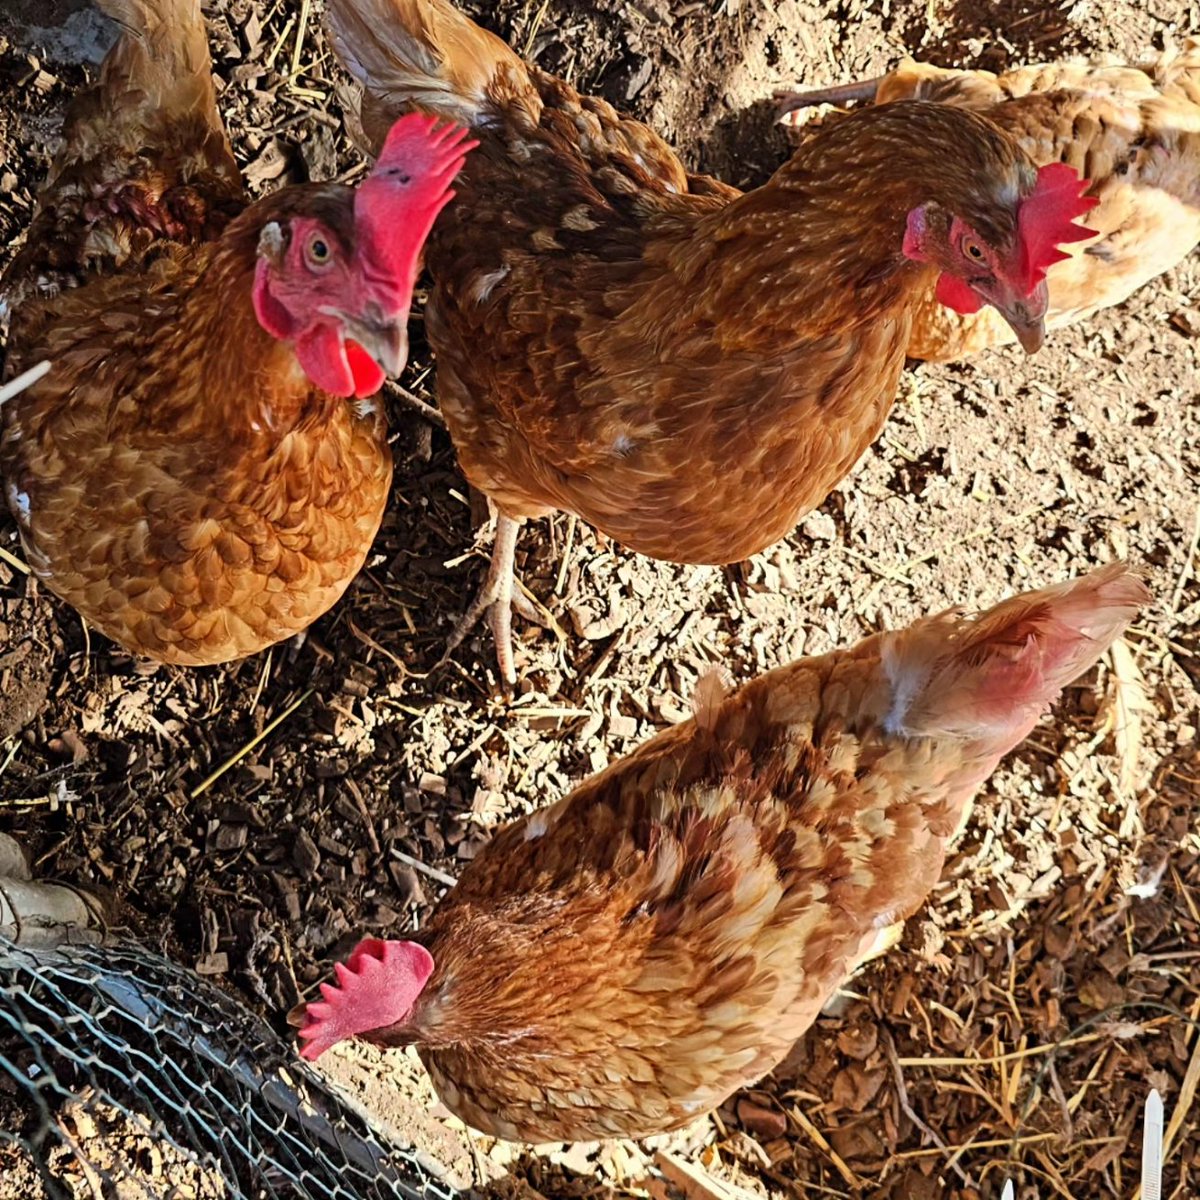 The new chickens have settled in well  🥰 They're super friendly and love seeing the children! #school #chickens #outdoorkids #eyfs #schoolchickens